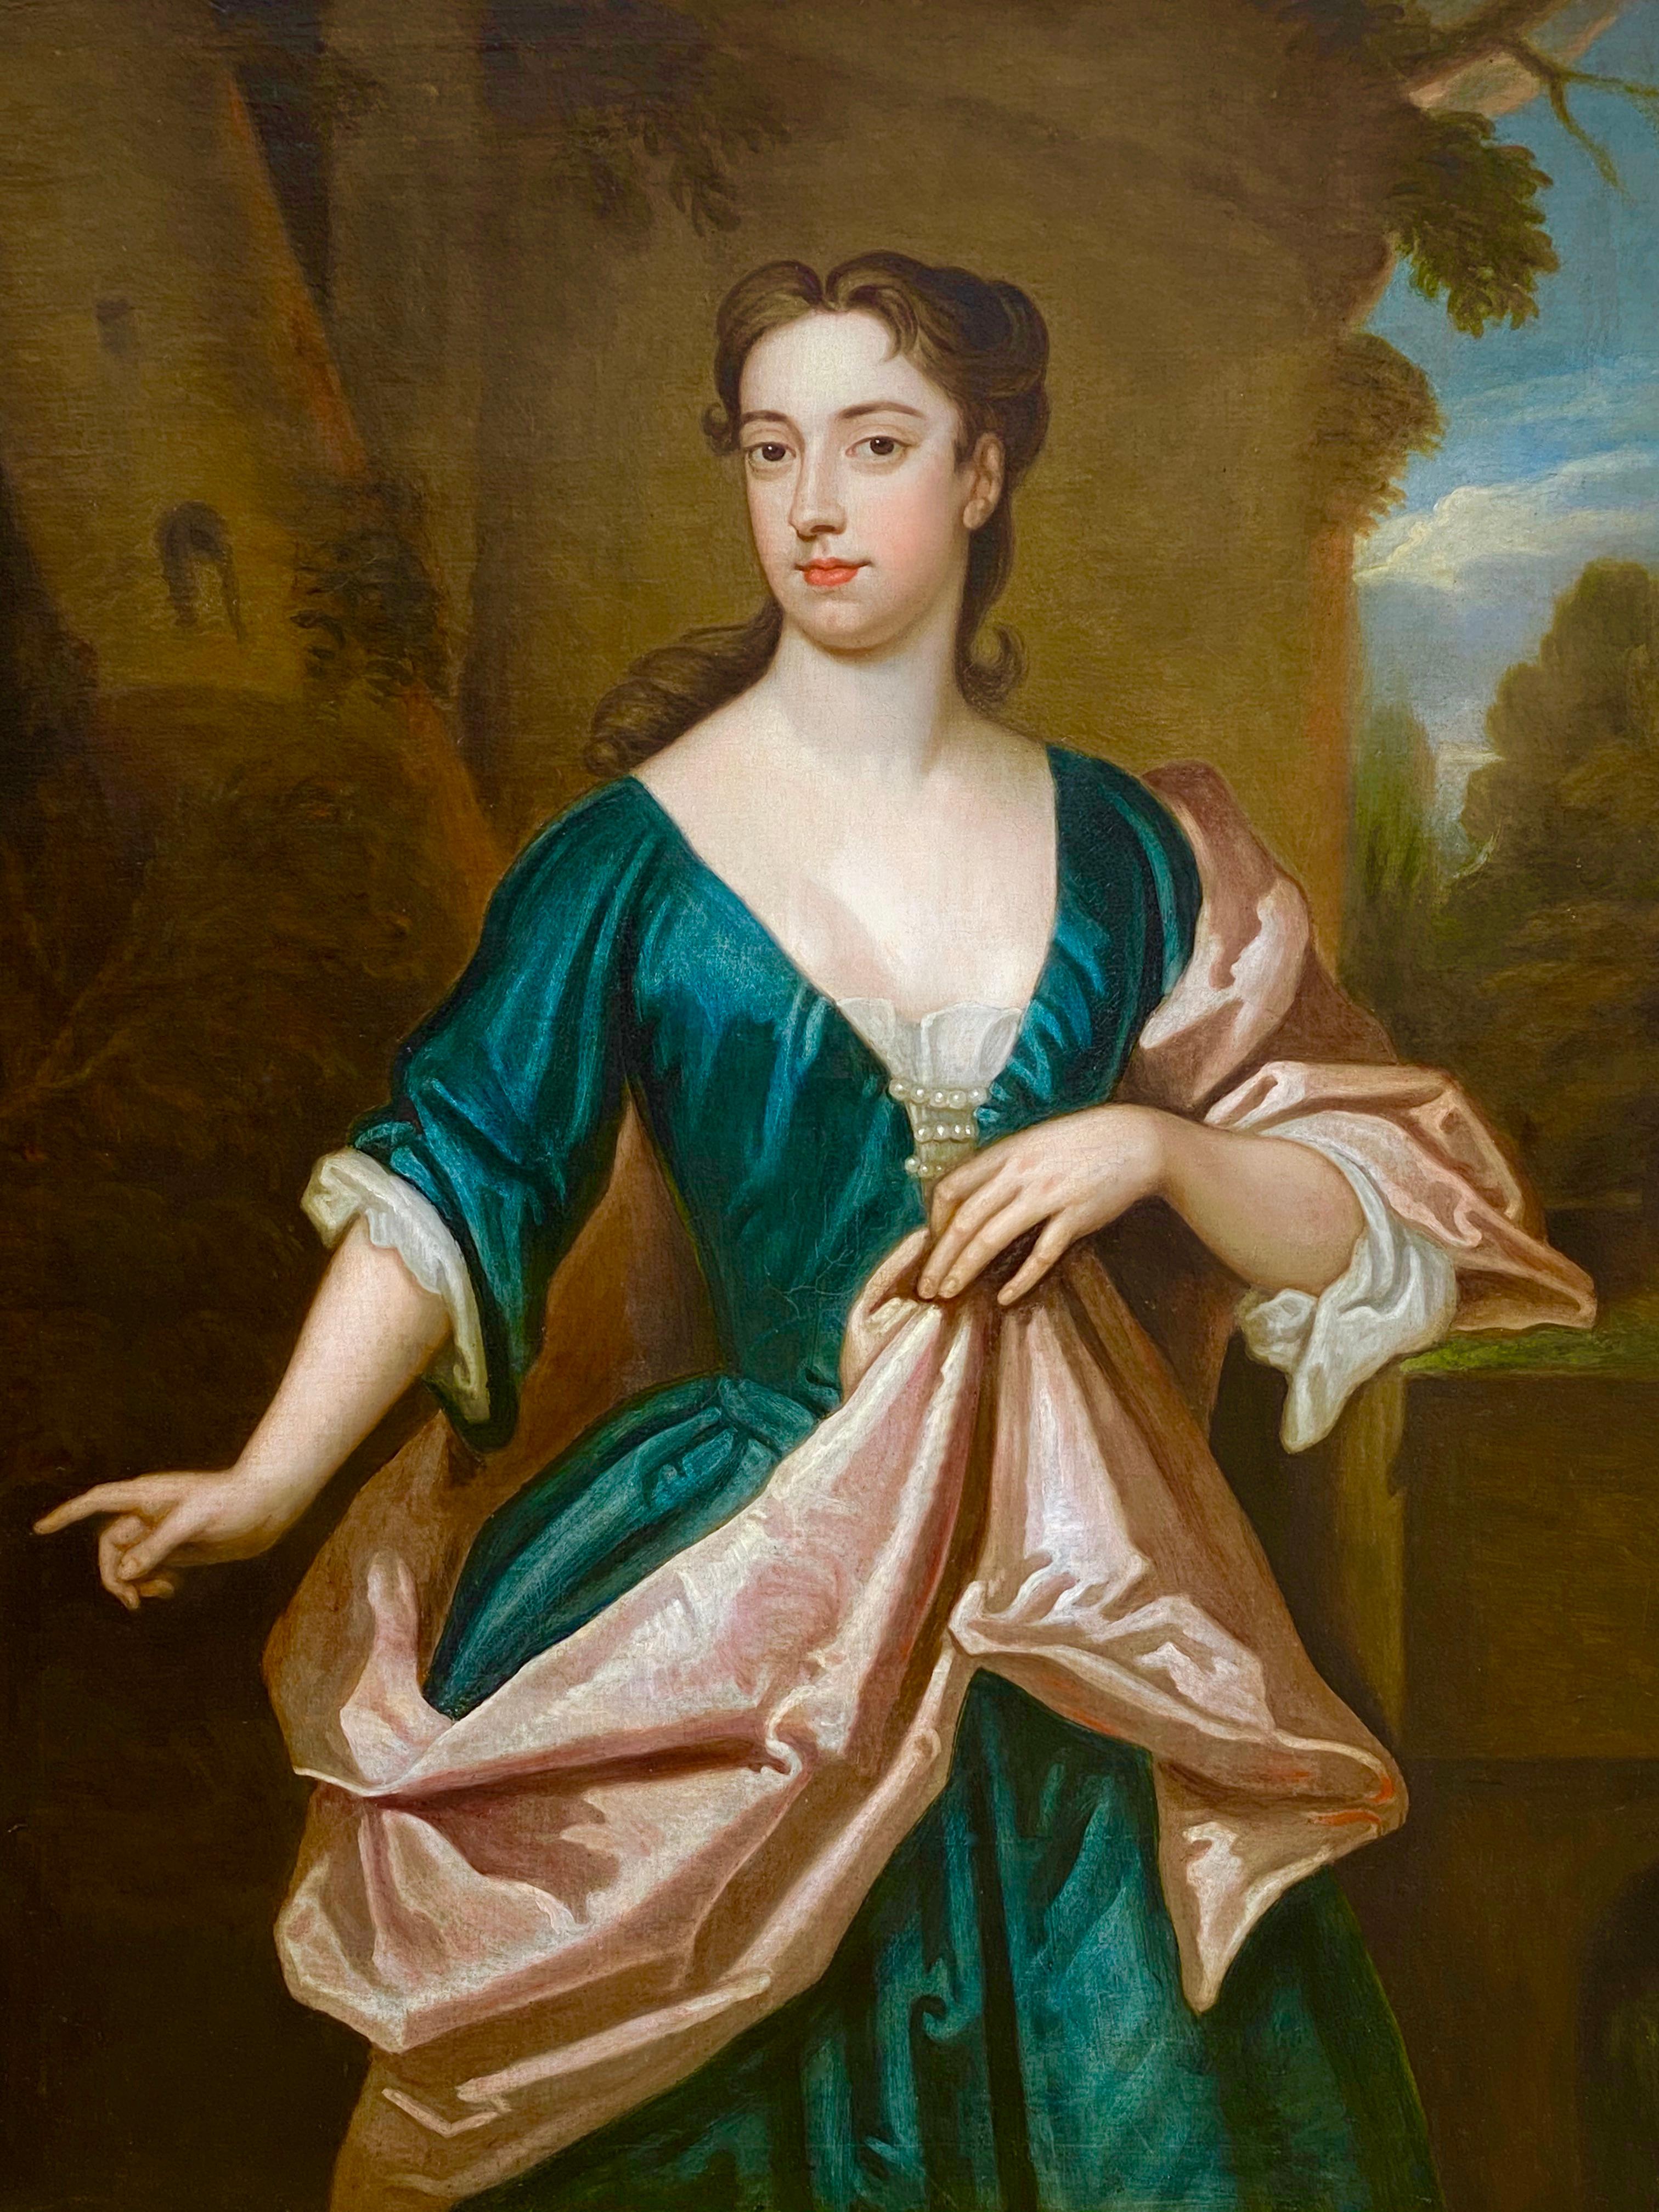 EARLY 18TH CENTURY ENGLISH PORTRAIT OF A LADY - CIRCLE OF SIR GODFREY KNELLER. - Old Masters Painting by (Circle of) Godfrey Kneller